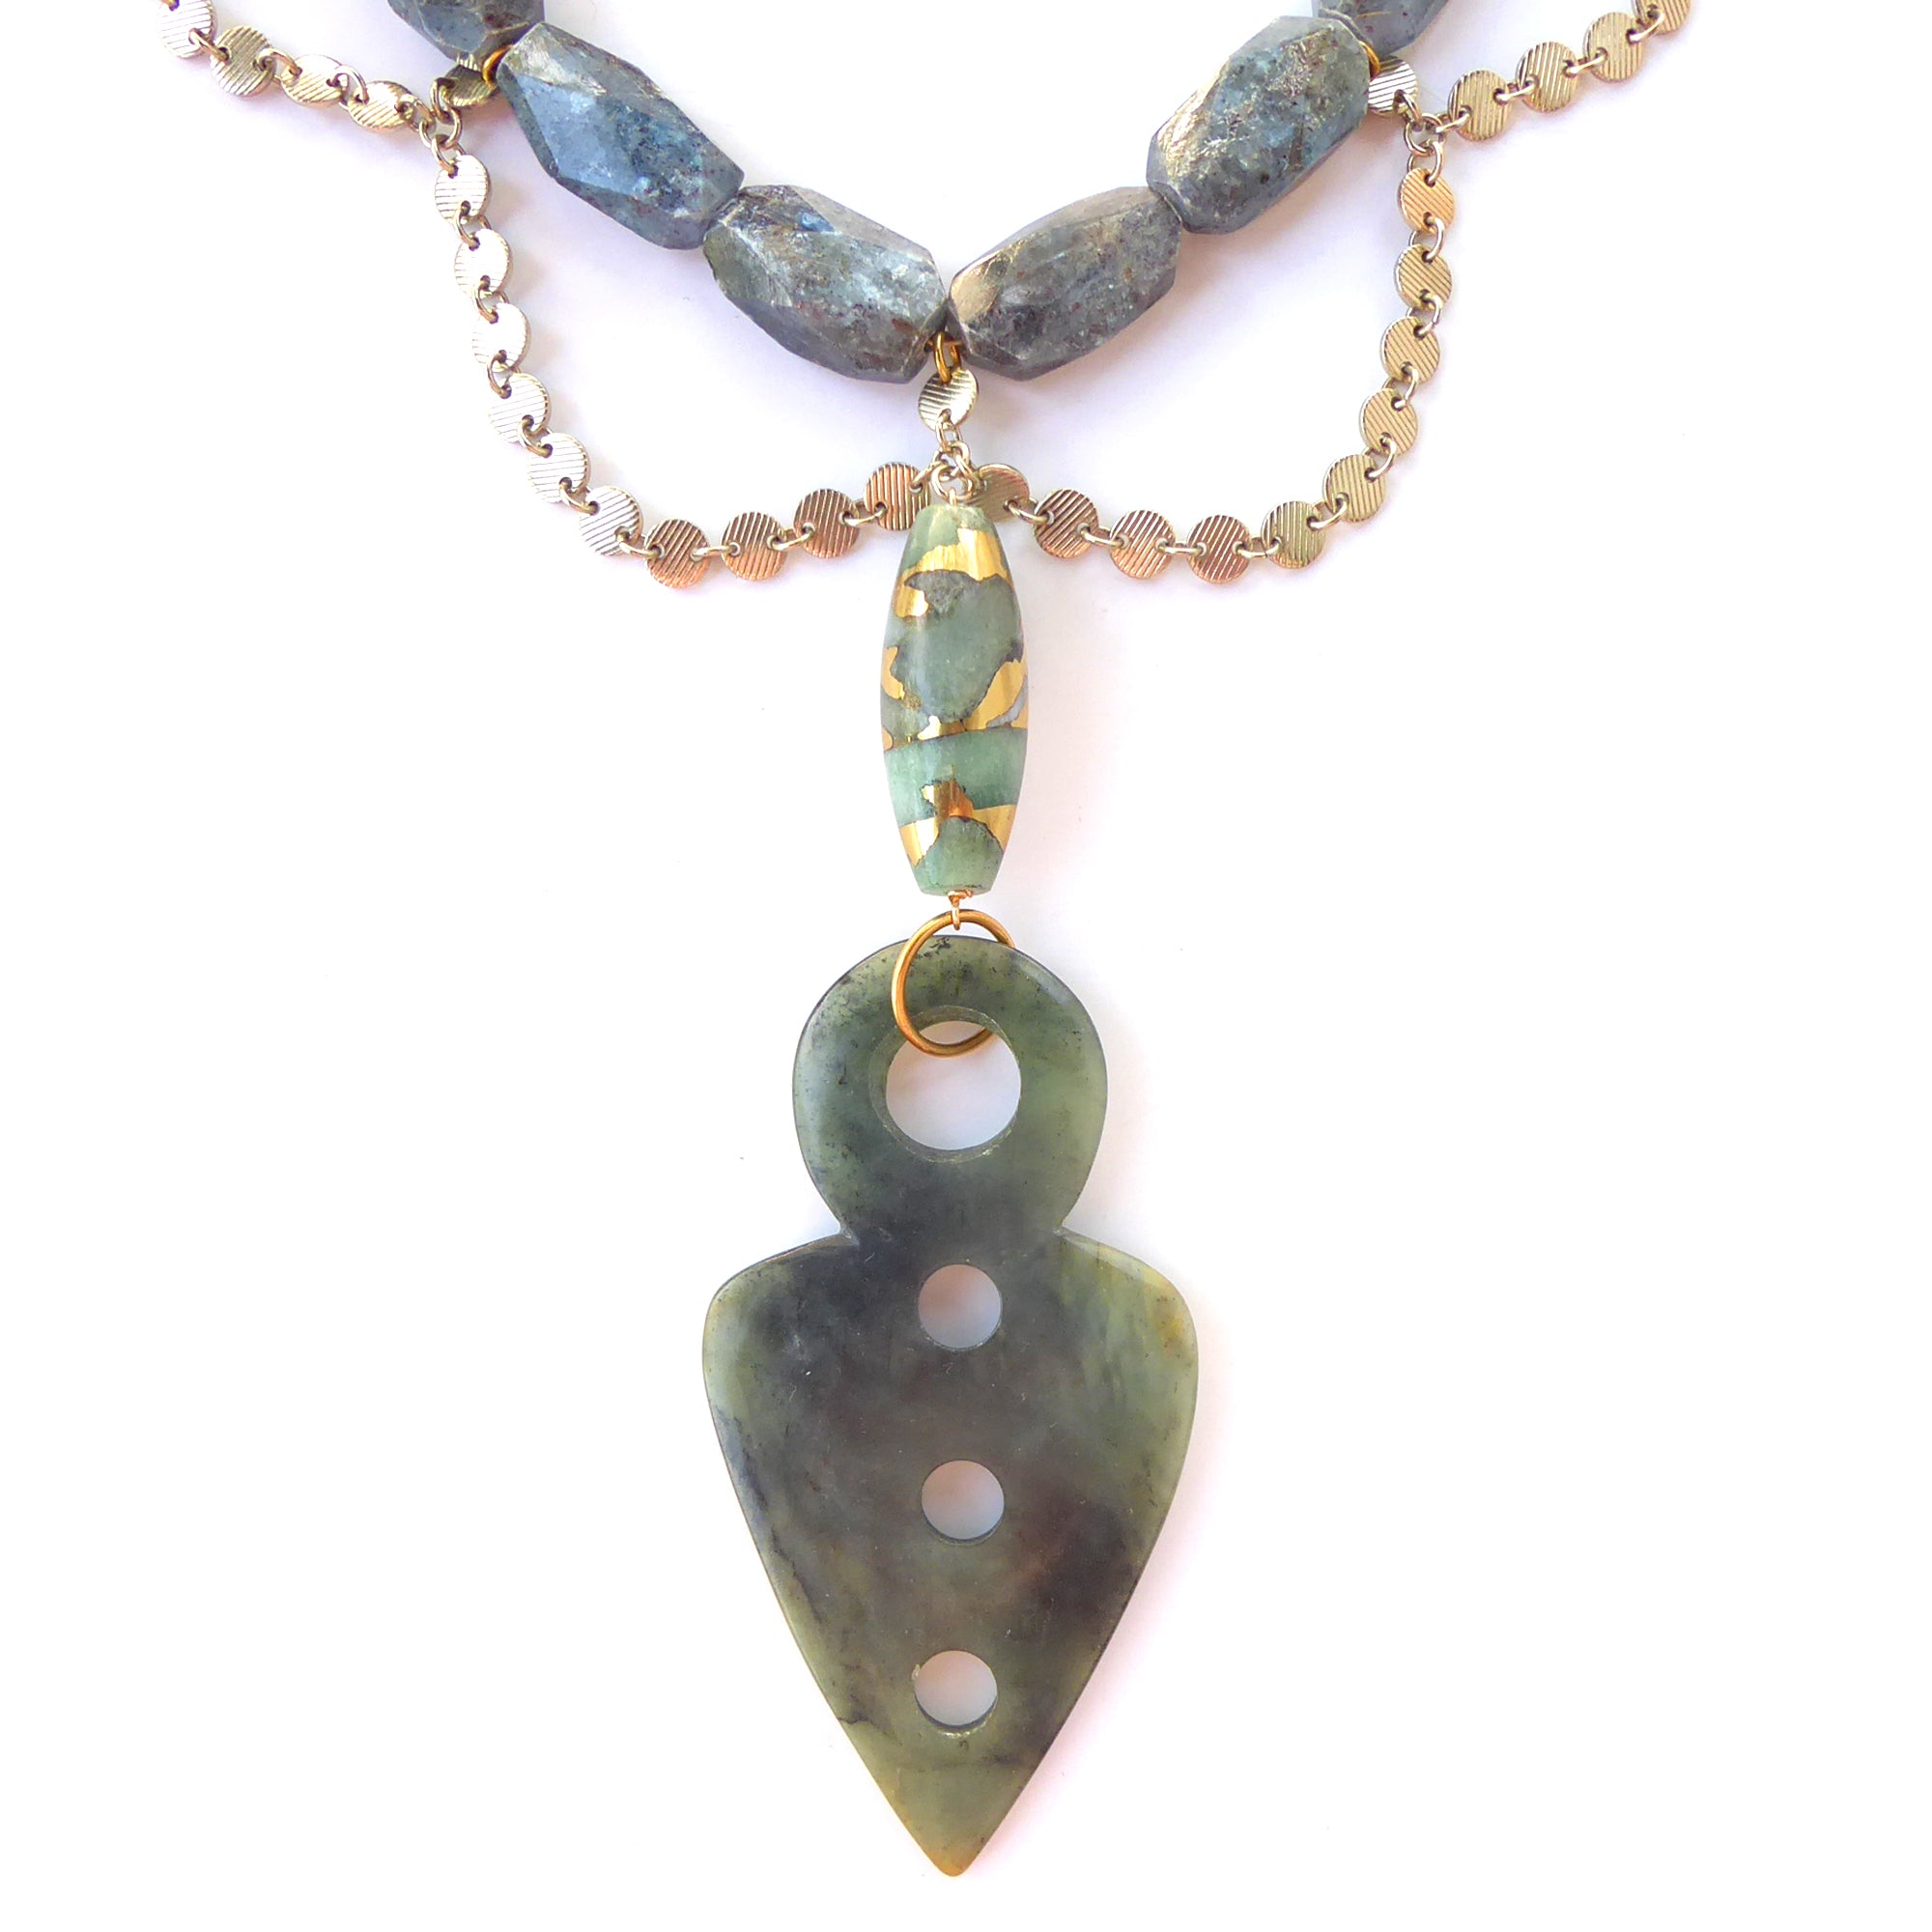 Serpentine spearhead necklace by Jenny Dayco 4